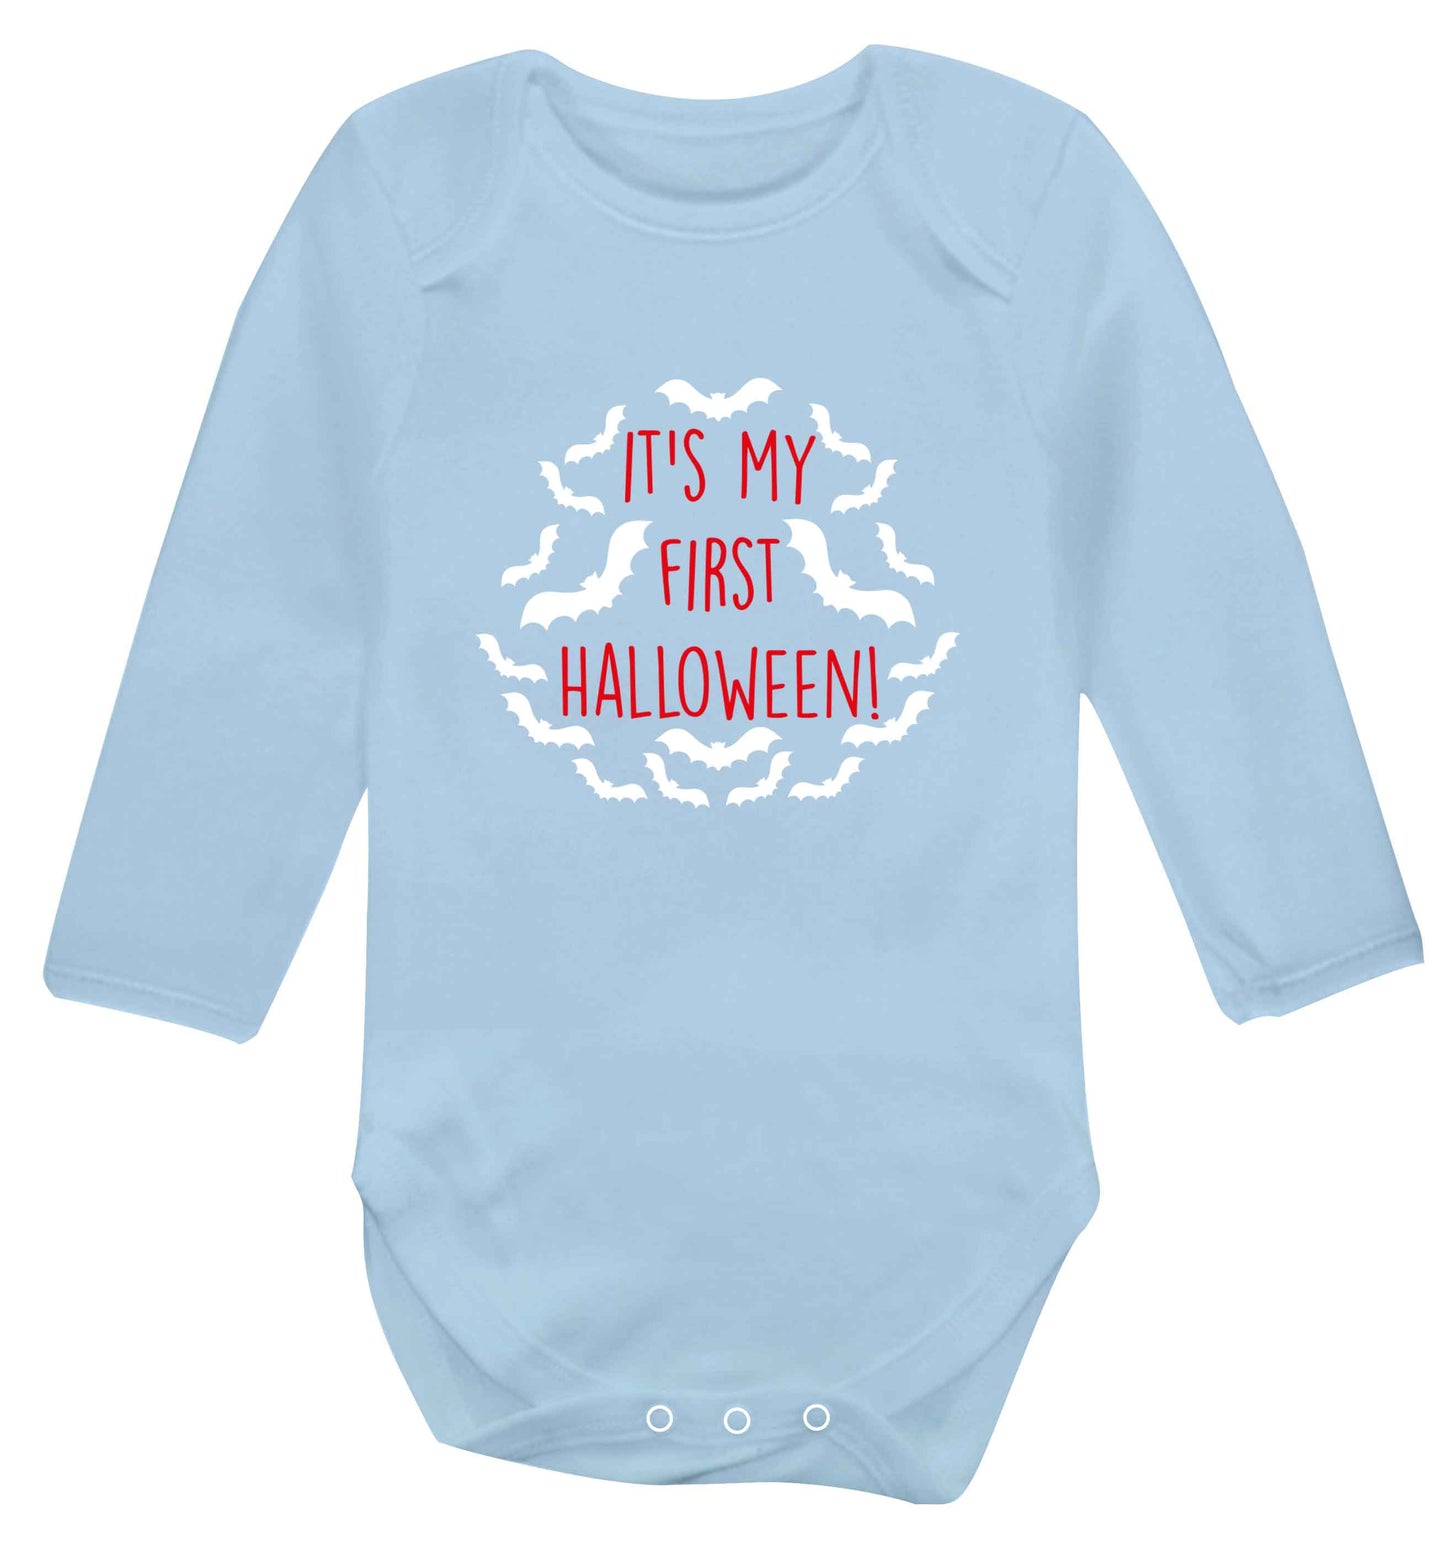 It's my first halloween - bat border baby vest long sleeved pale blue 6-12 months